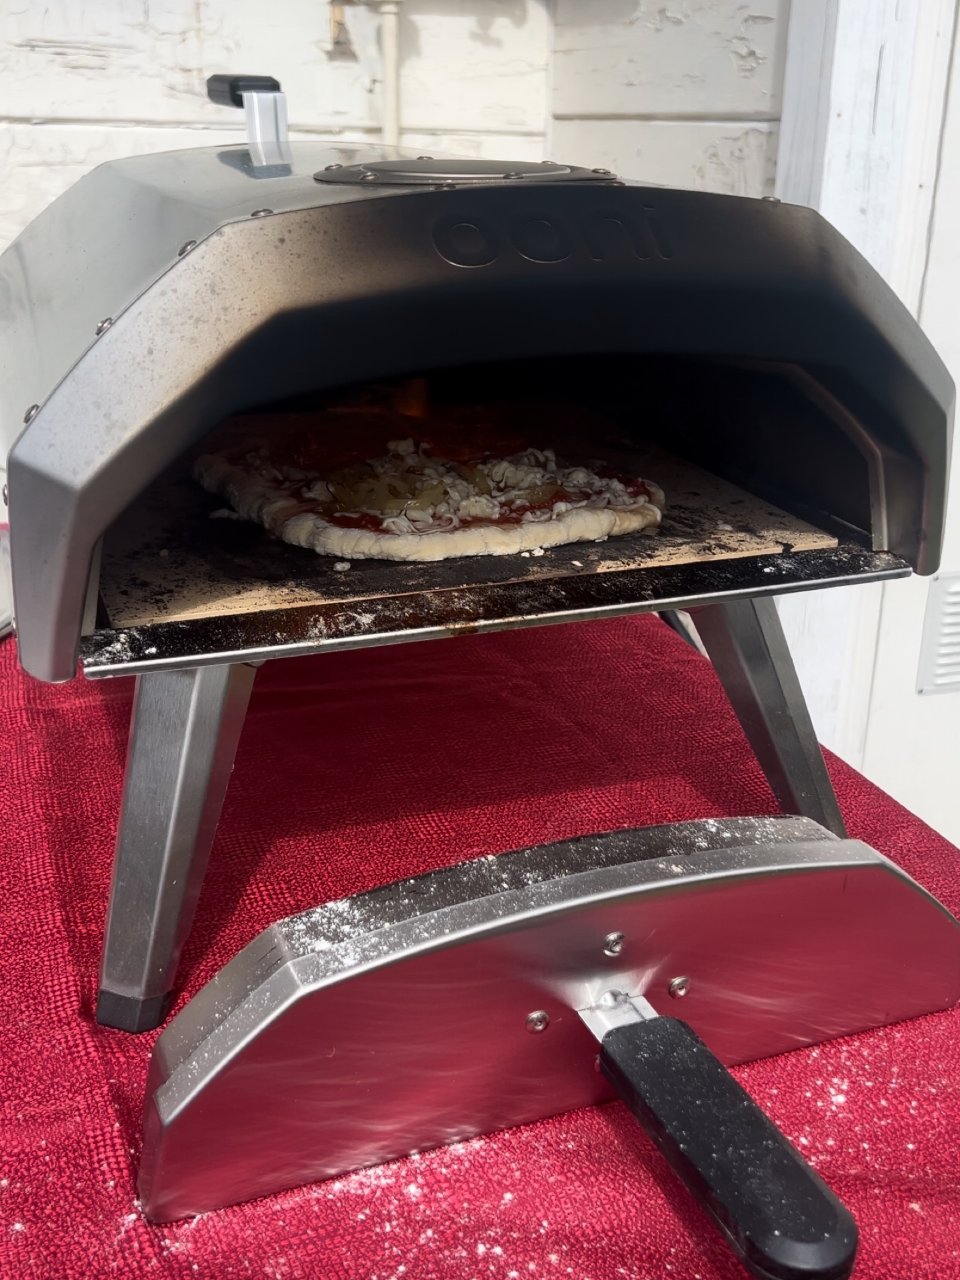 Pizza oven入手，自制披萨🍕5分...